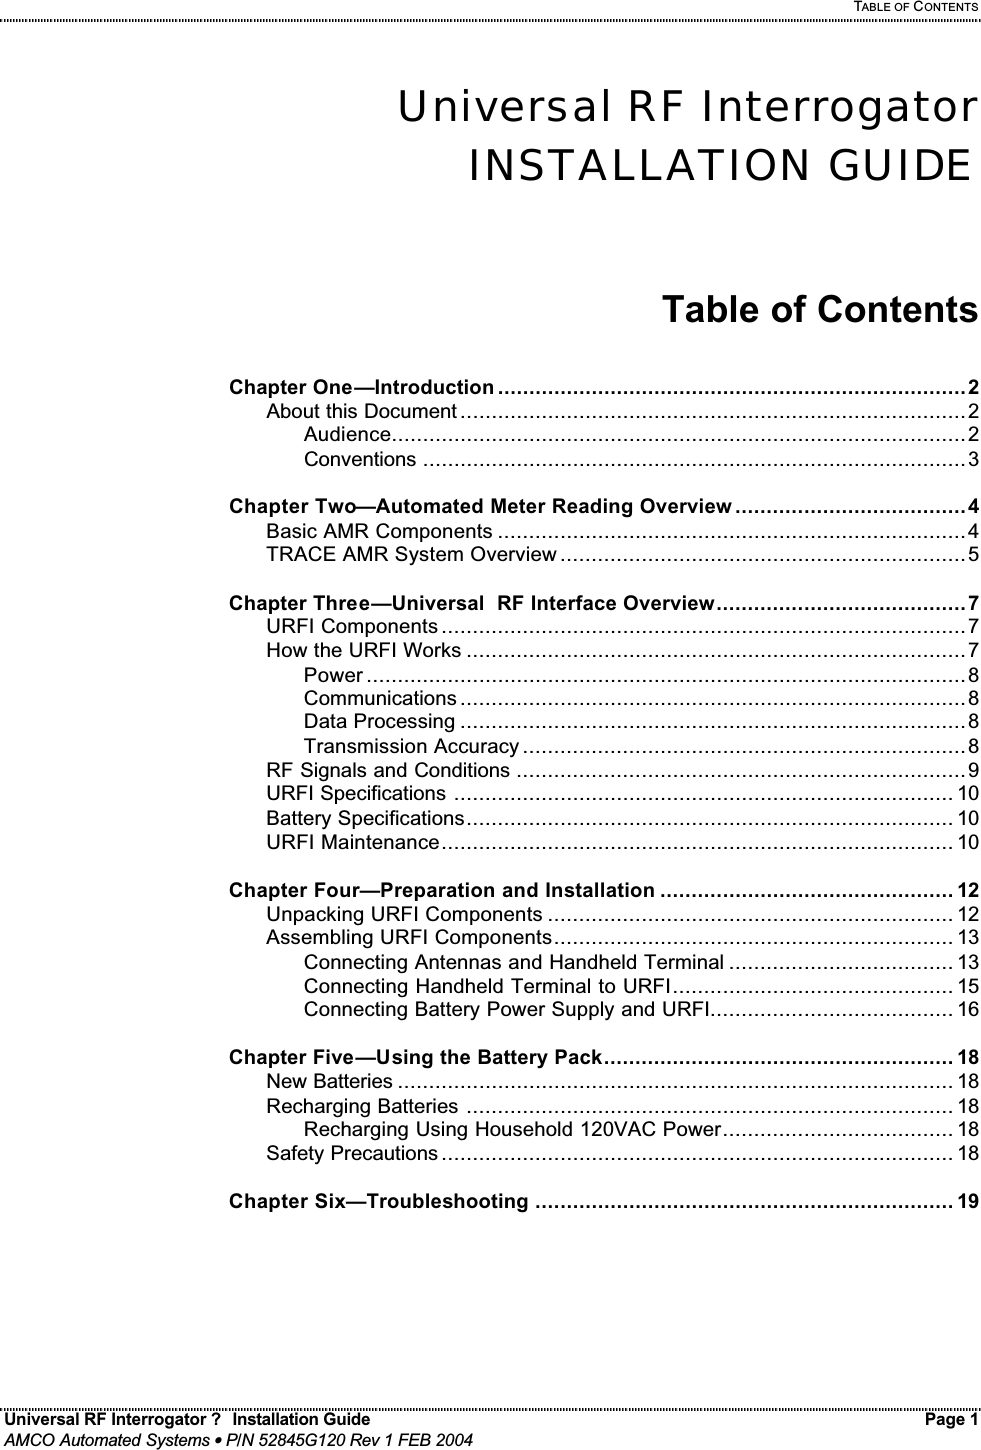   TABLE OF CONTENTS Universal RF Interrogator ?  Installation Guide    Page 1  AMCO Automated Systems • P/N 52845G120 Rev 1 FEB 2004                                                                                                                                 Universal RF Interrogator INSTALLATION GUIDE   Table of Contents  Chapter One—Introduction ...........................................................................2   About this Document .................................................................................2     Audience............................................................................................2     Conventions .......................................................................................3  Chapter Two—Automated Meter Reading Overview .....................................4   Basic AMR Components ...........................................................................4   TRACE AMR System Overview .................................................................5  Chapter Three—Universal  RF Interface Overview........................................7   URFI Components ....................................................................................7   How the URFI Works ................................................................................7     Power ................................................................................................8     Communications .................................................................................8     Data Processing .................................................................................8     Transmission Accuracy .......................................................................8   RF Signals and Conditions ........................................................................9   URFI Specifications ................................................................................ 10   Battery Specifications.............................................................................. 10   URFI Maintenance.................................................................................. 10  Chapter Four—Preparation and Installation ............................................... 12   Unpacking URFI Components ................................................................. 12   Assembling URFI Components................................................................ 13     Connecting Antennas and Handheld Terminal .................................... 13     Connecting Handheld Terminal to URFI............................................. 15     Connecting Battery Power Supply and URFI....................................... 16  Chapter Five—Using the Battery Pack........................................................ 18   New Batteries ......................................................................................... 18   Recharging Batteries .............................................................................. 18     Recharging Using Household 120VAC Power..................................... 18   Safety Precautions .................................................................................. 18  Chapter Six—Troubleshooting ................................................................... 19        